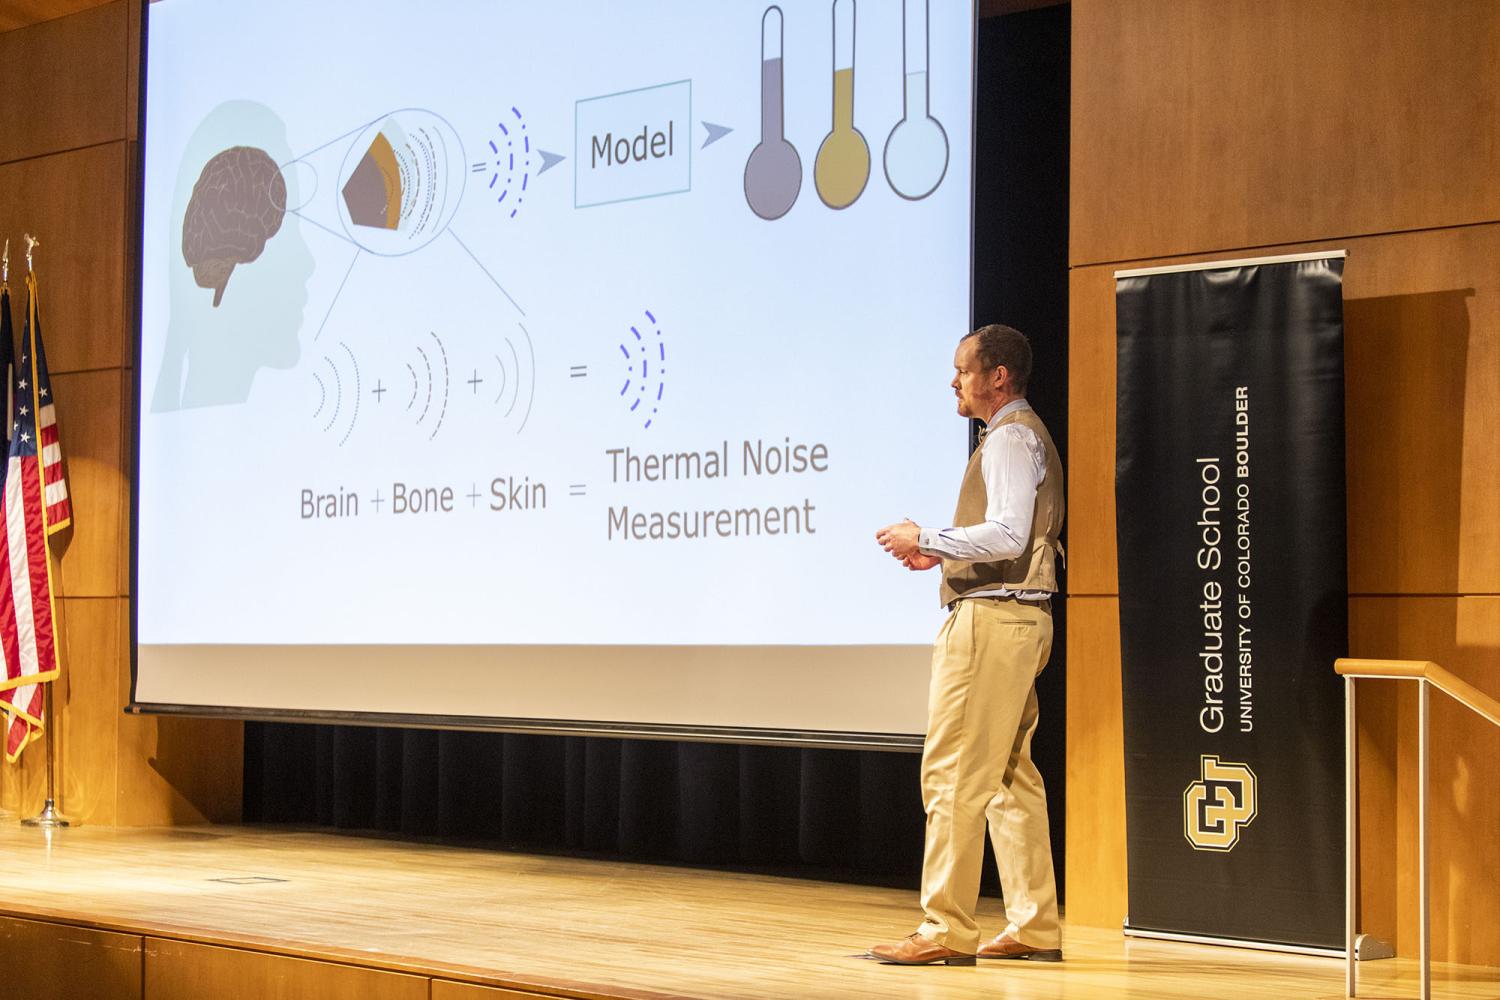 A Three Minute Thesis competitor